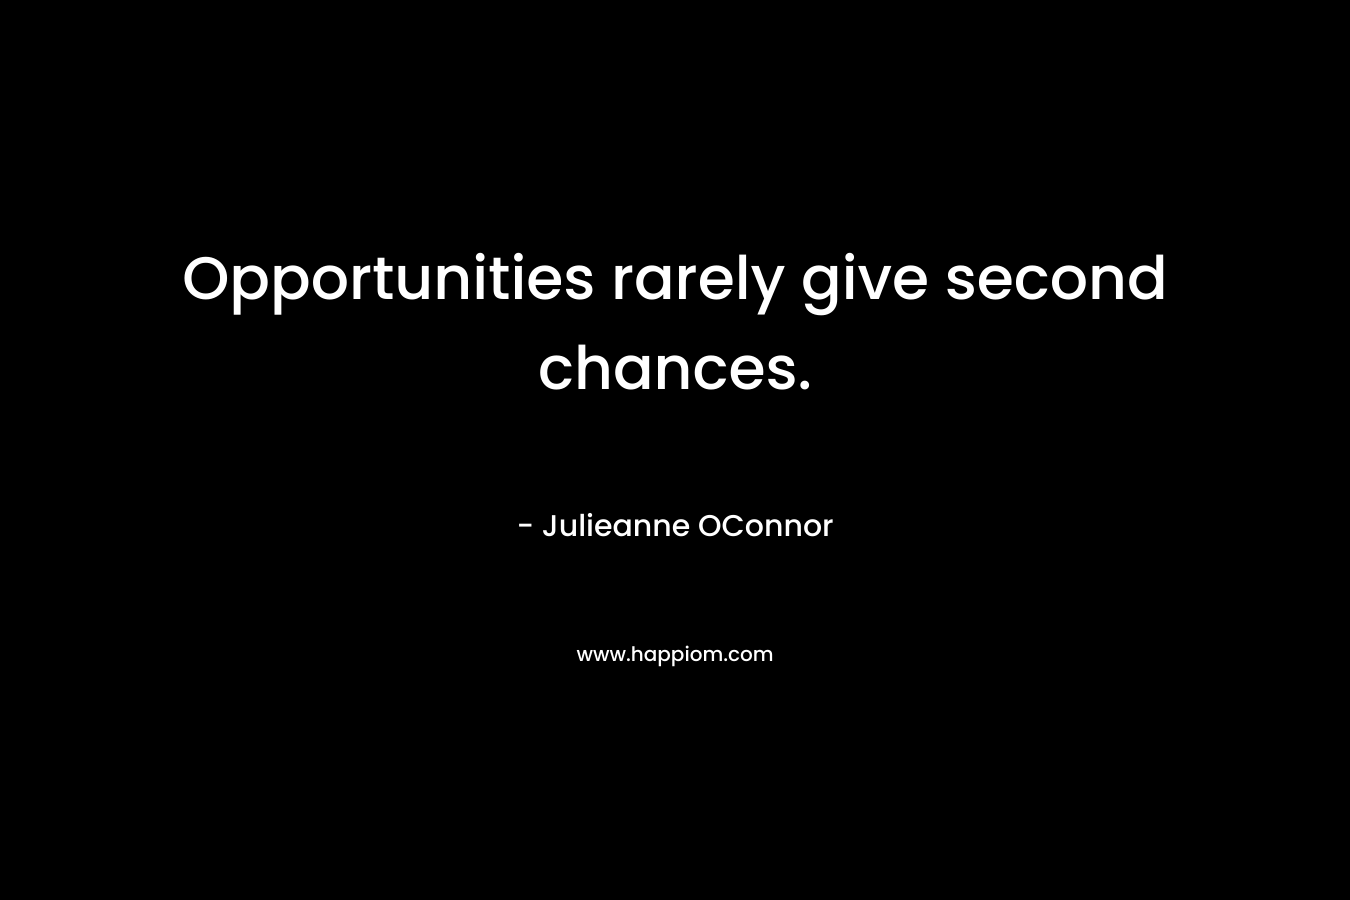 Opportunities rarely give second chances.